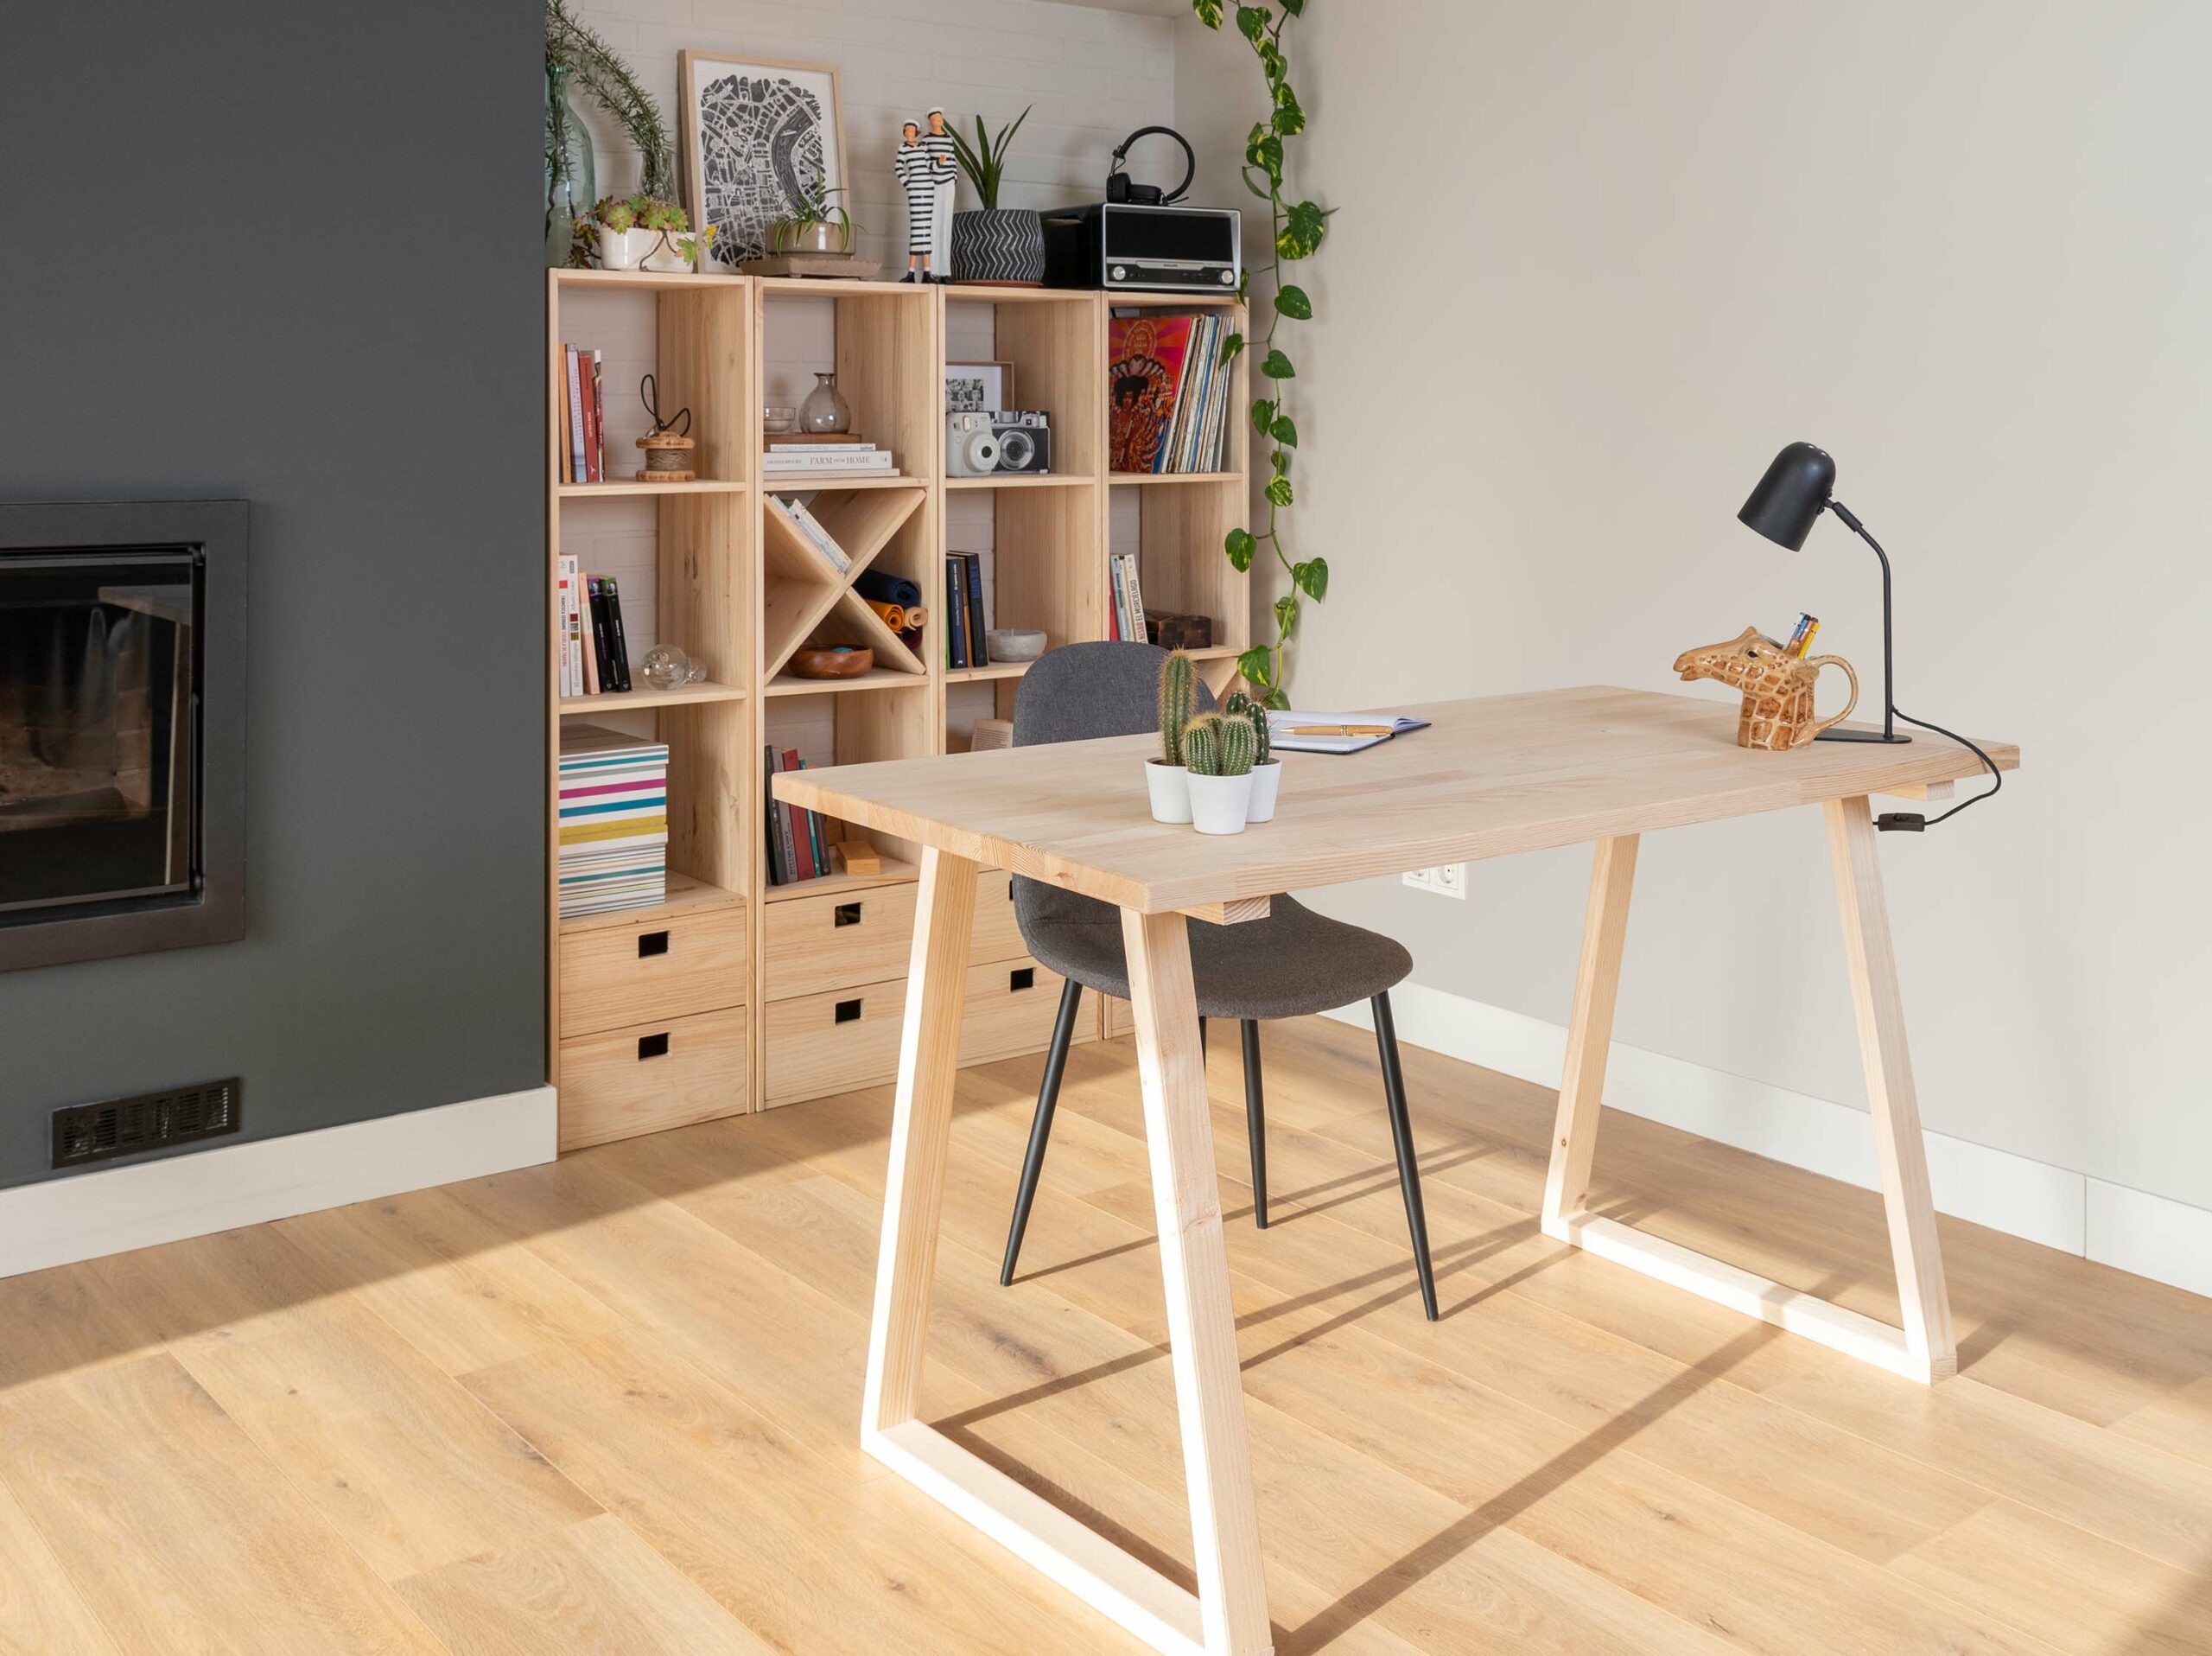 Eco-friendly wooden furniture with a conscience